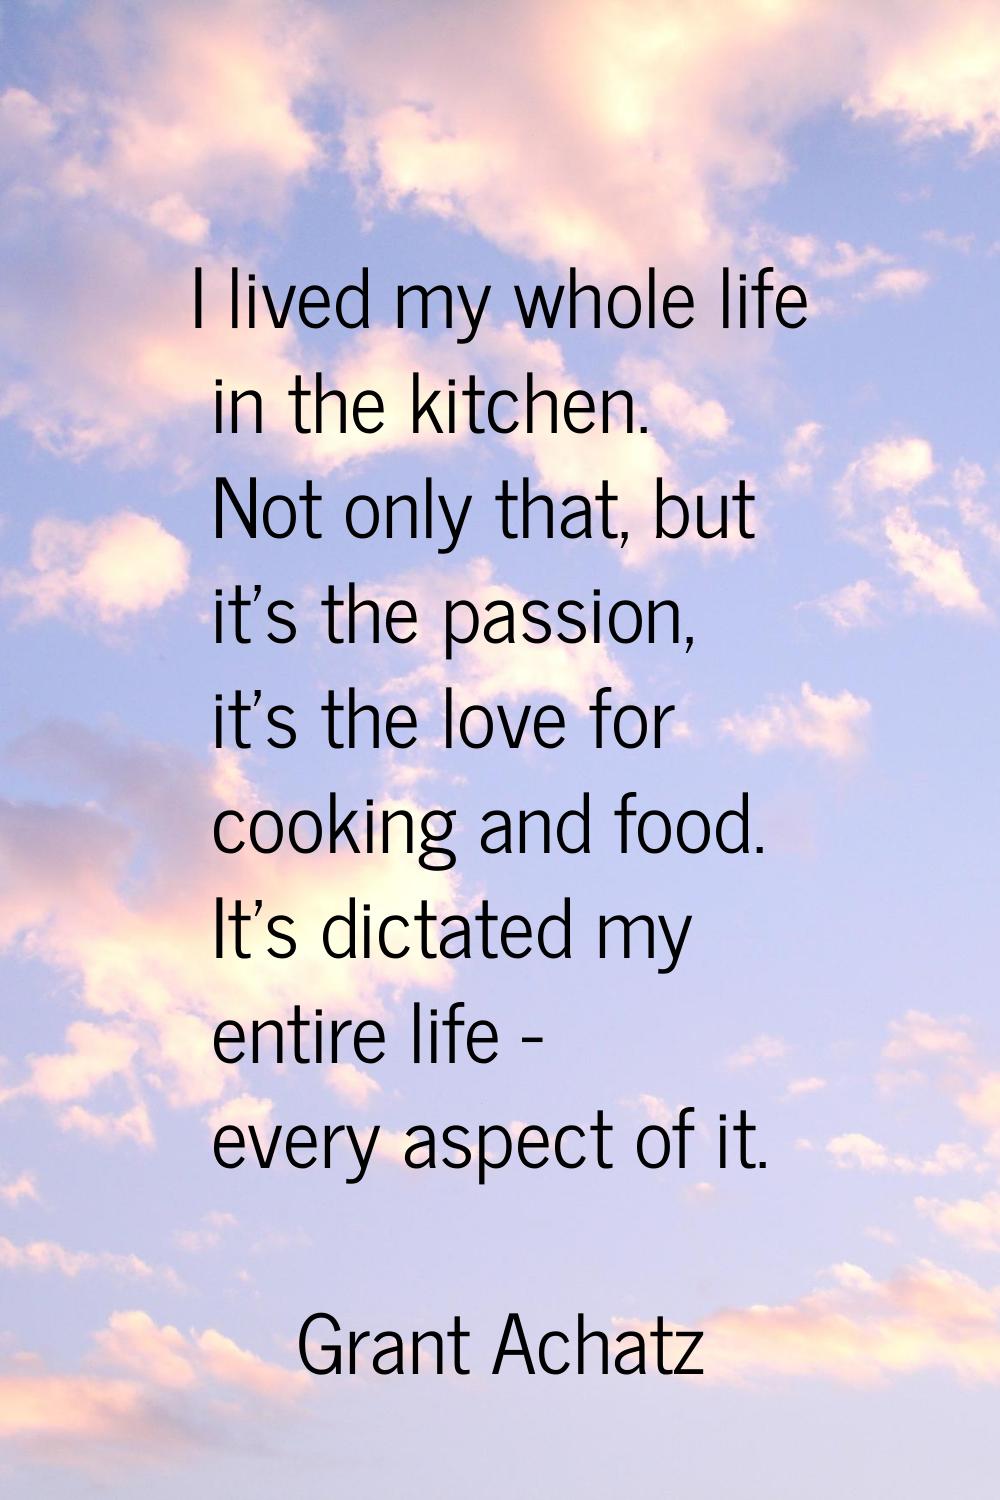 I lived my whole life in the kitchen. Not only that, but it's the passion, it's the love for cookin